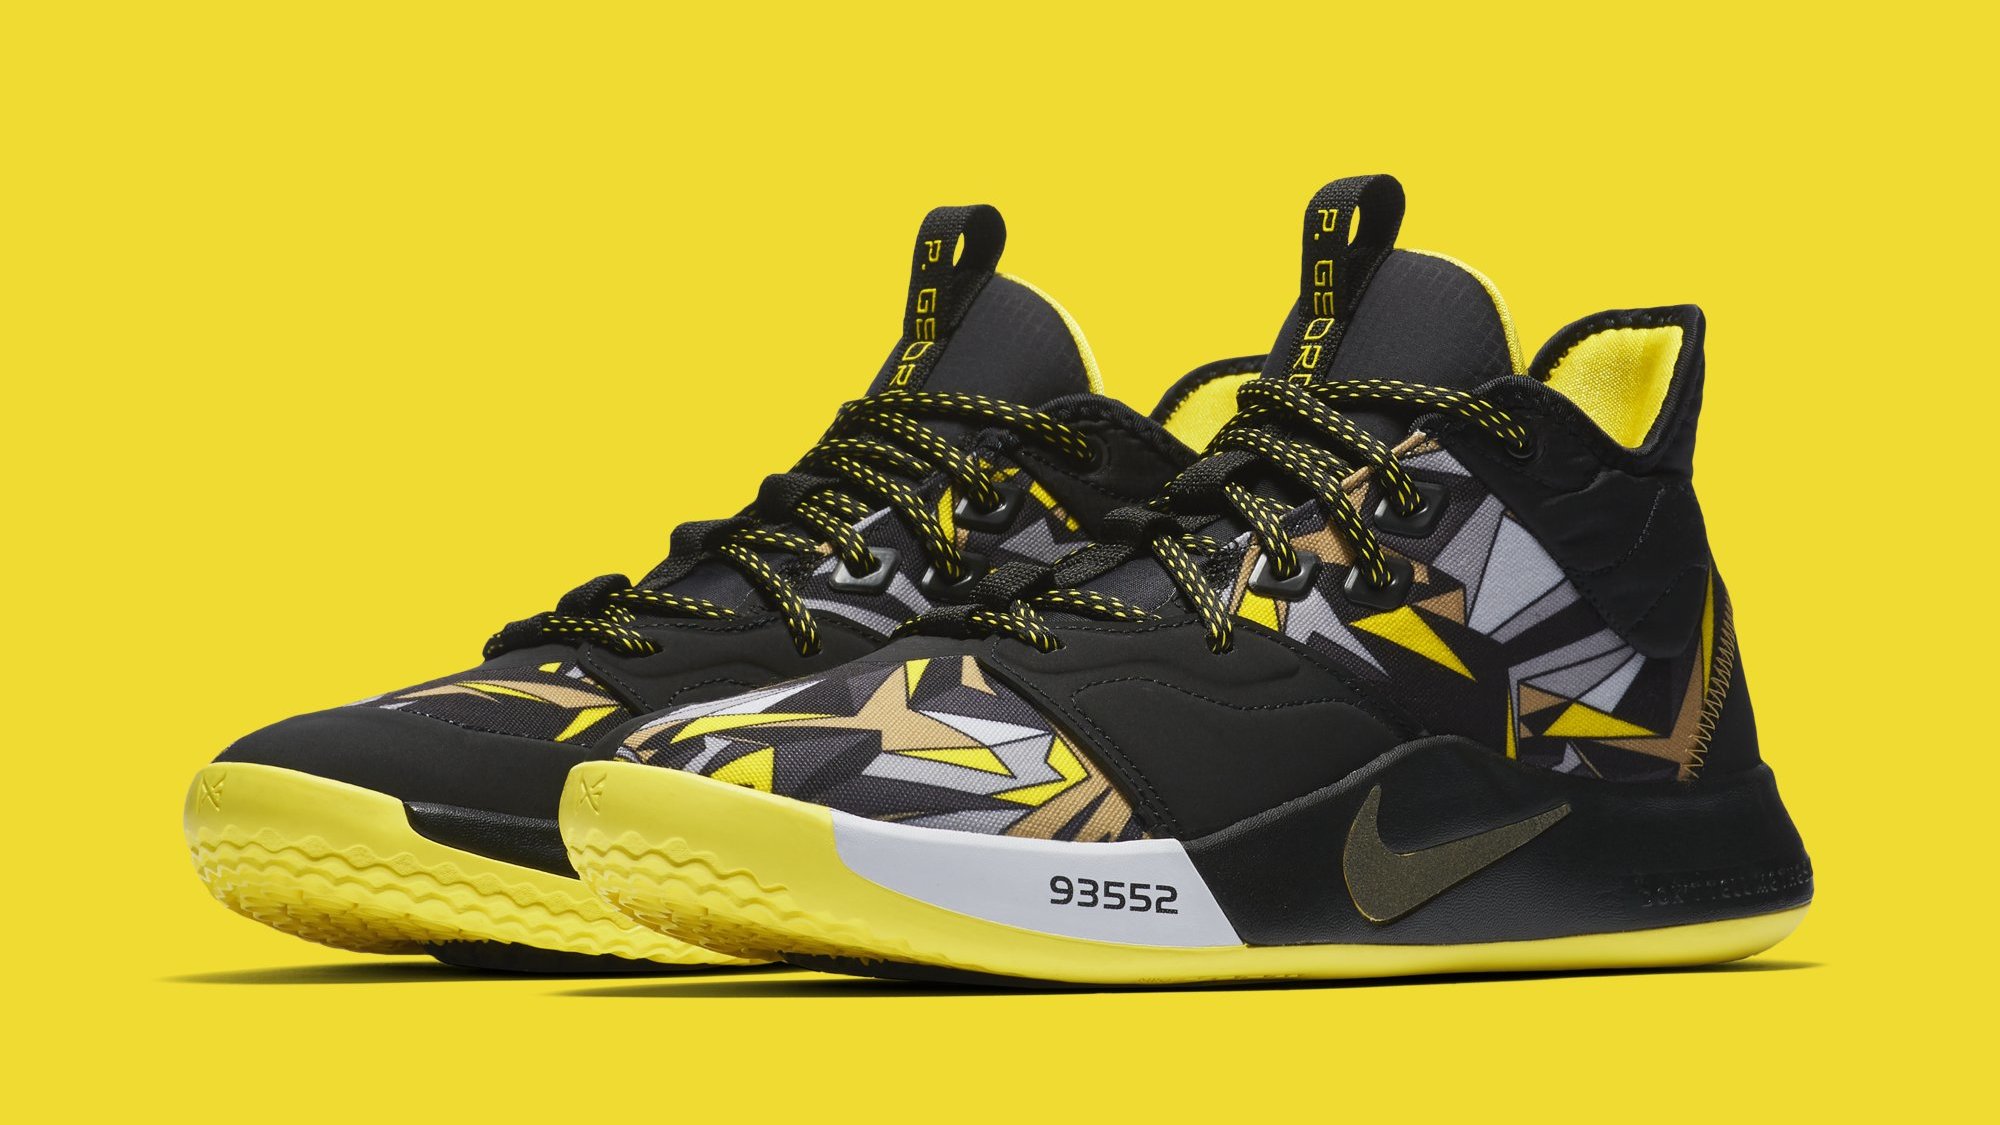 Nike PG 'Mamba Mentality' Yellow AO2607-900 Release Date | Sole Collector